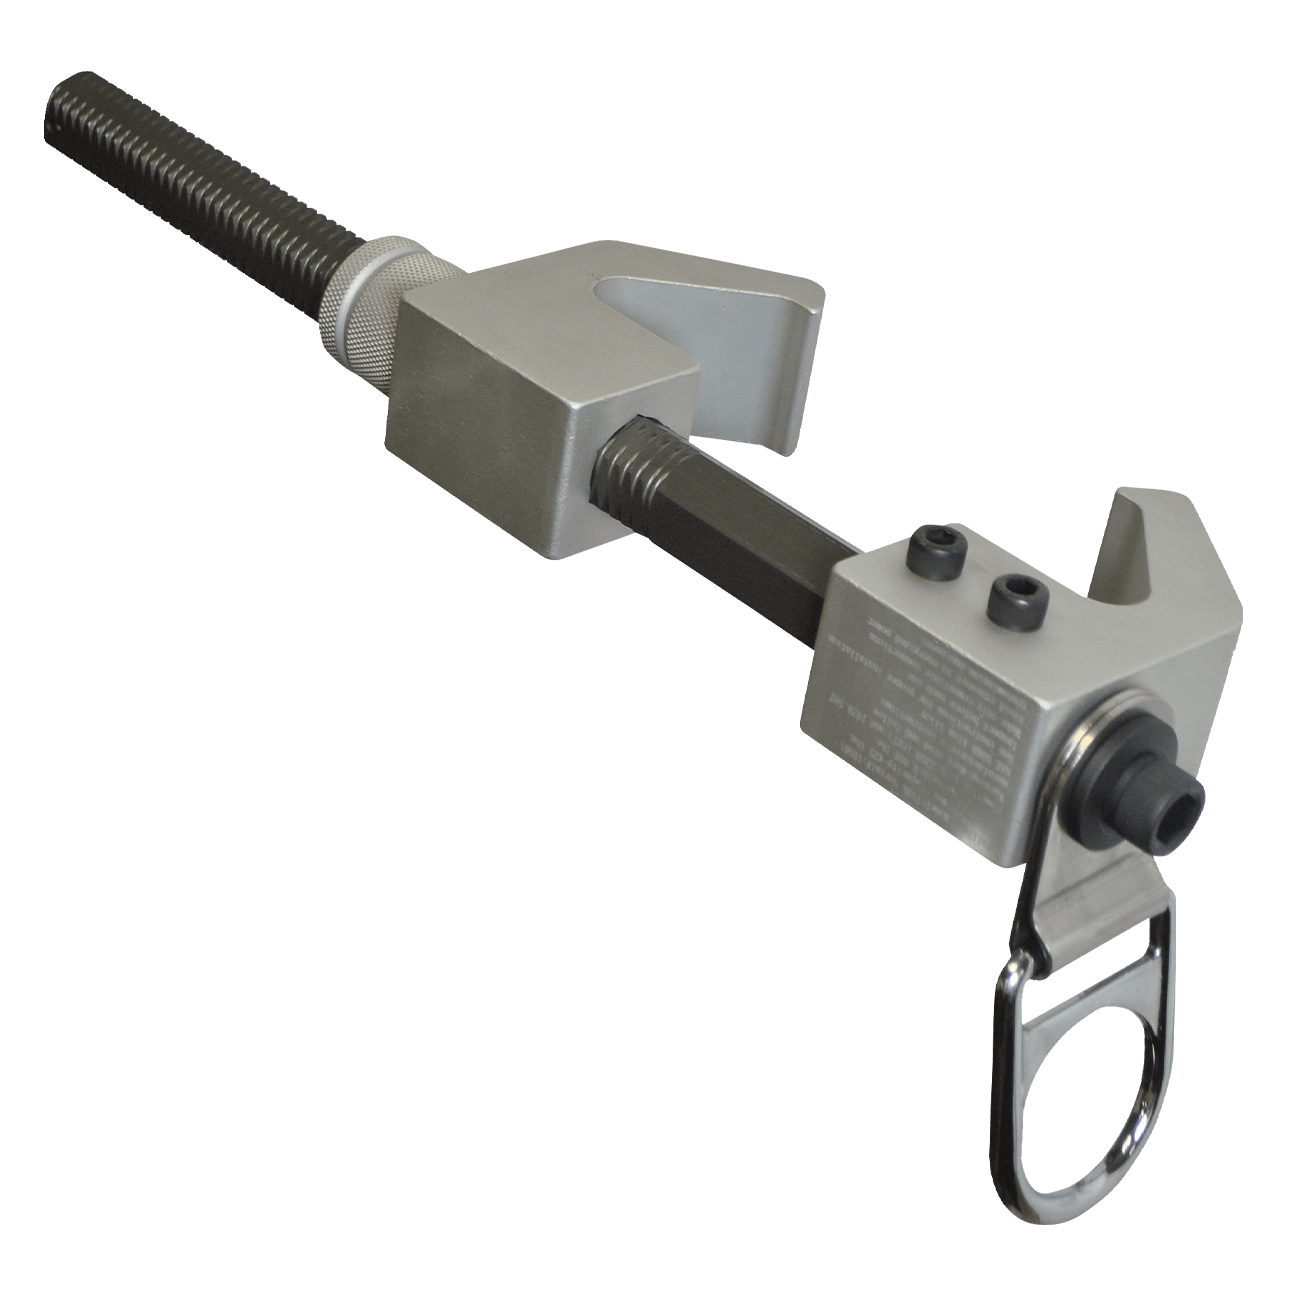 12 ¾" Vertical Beam Anchor for Fixed Locations